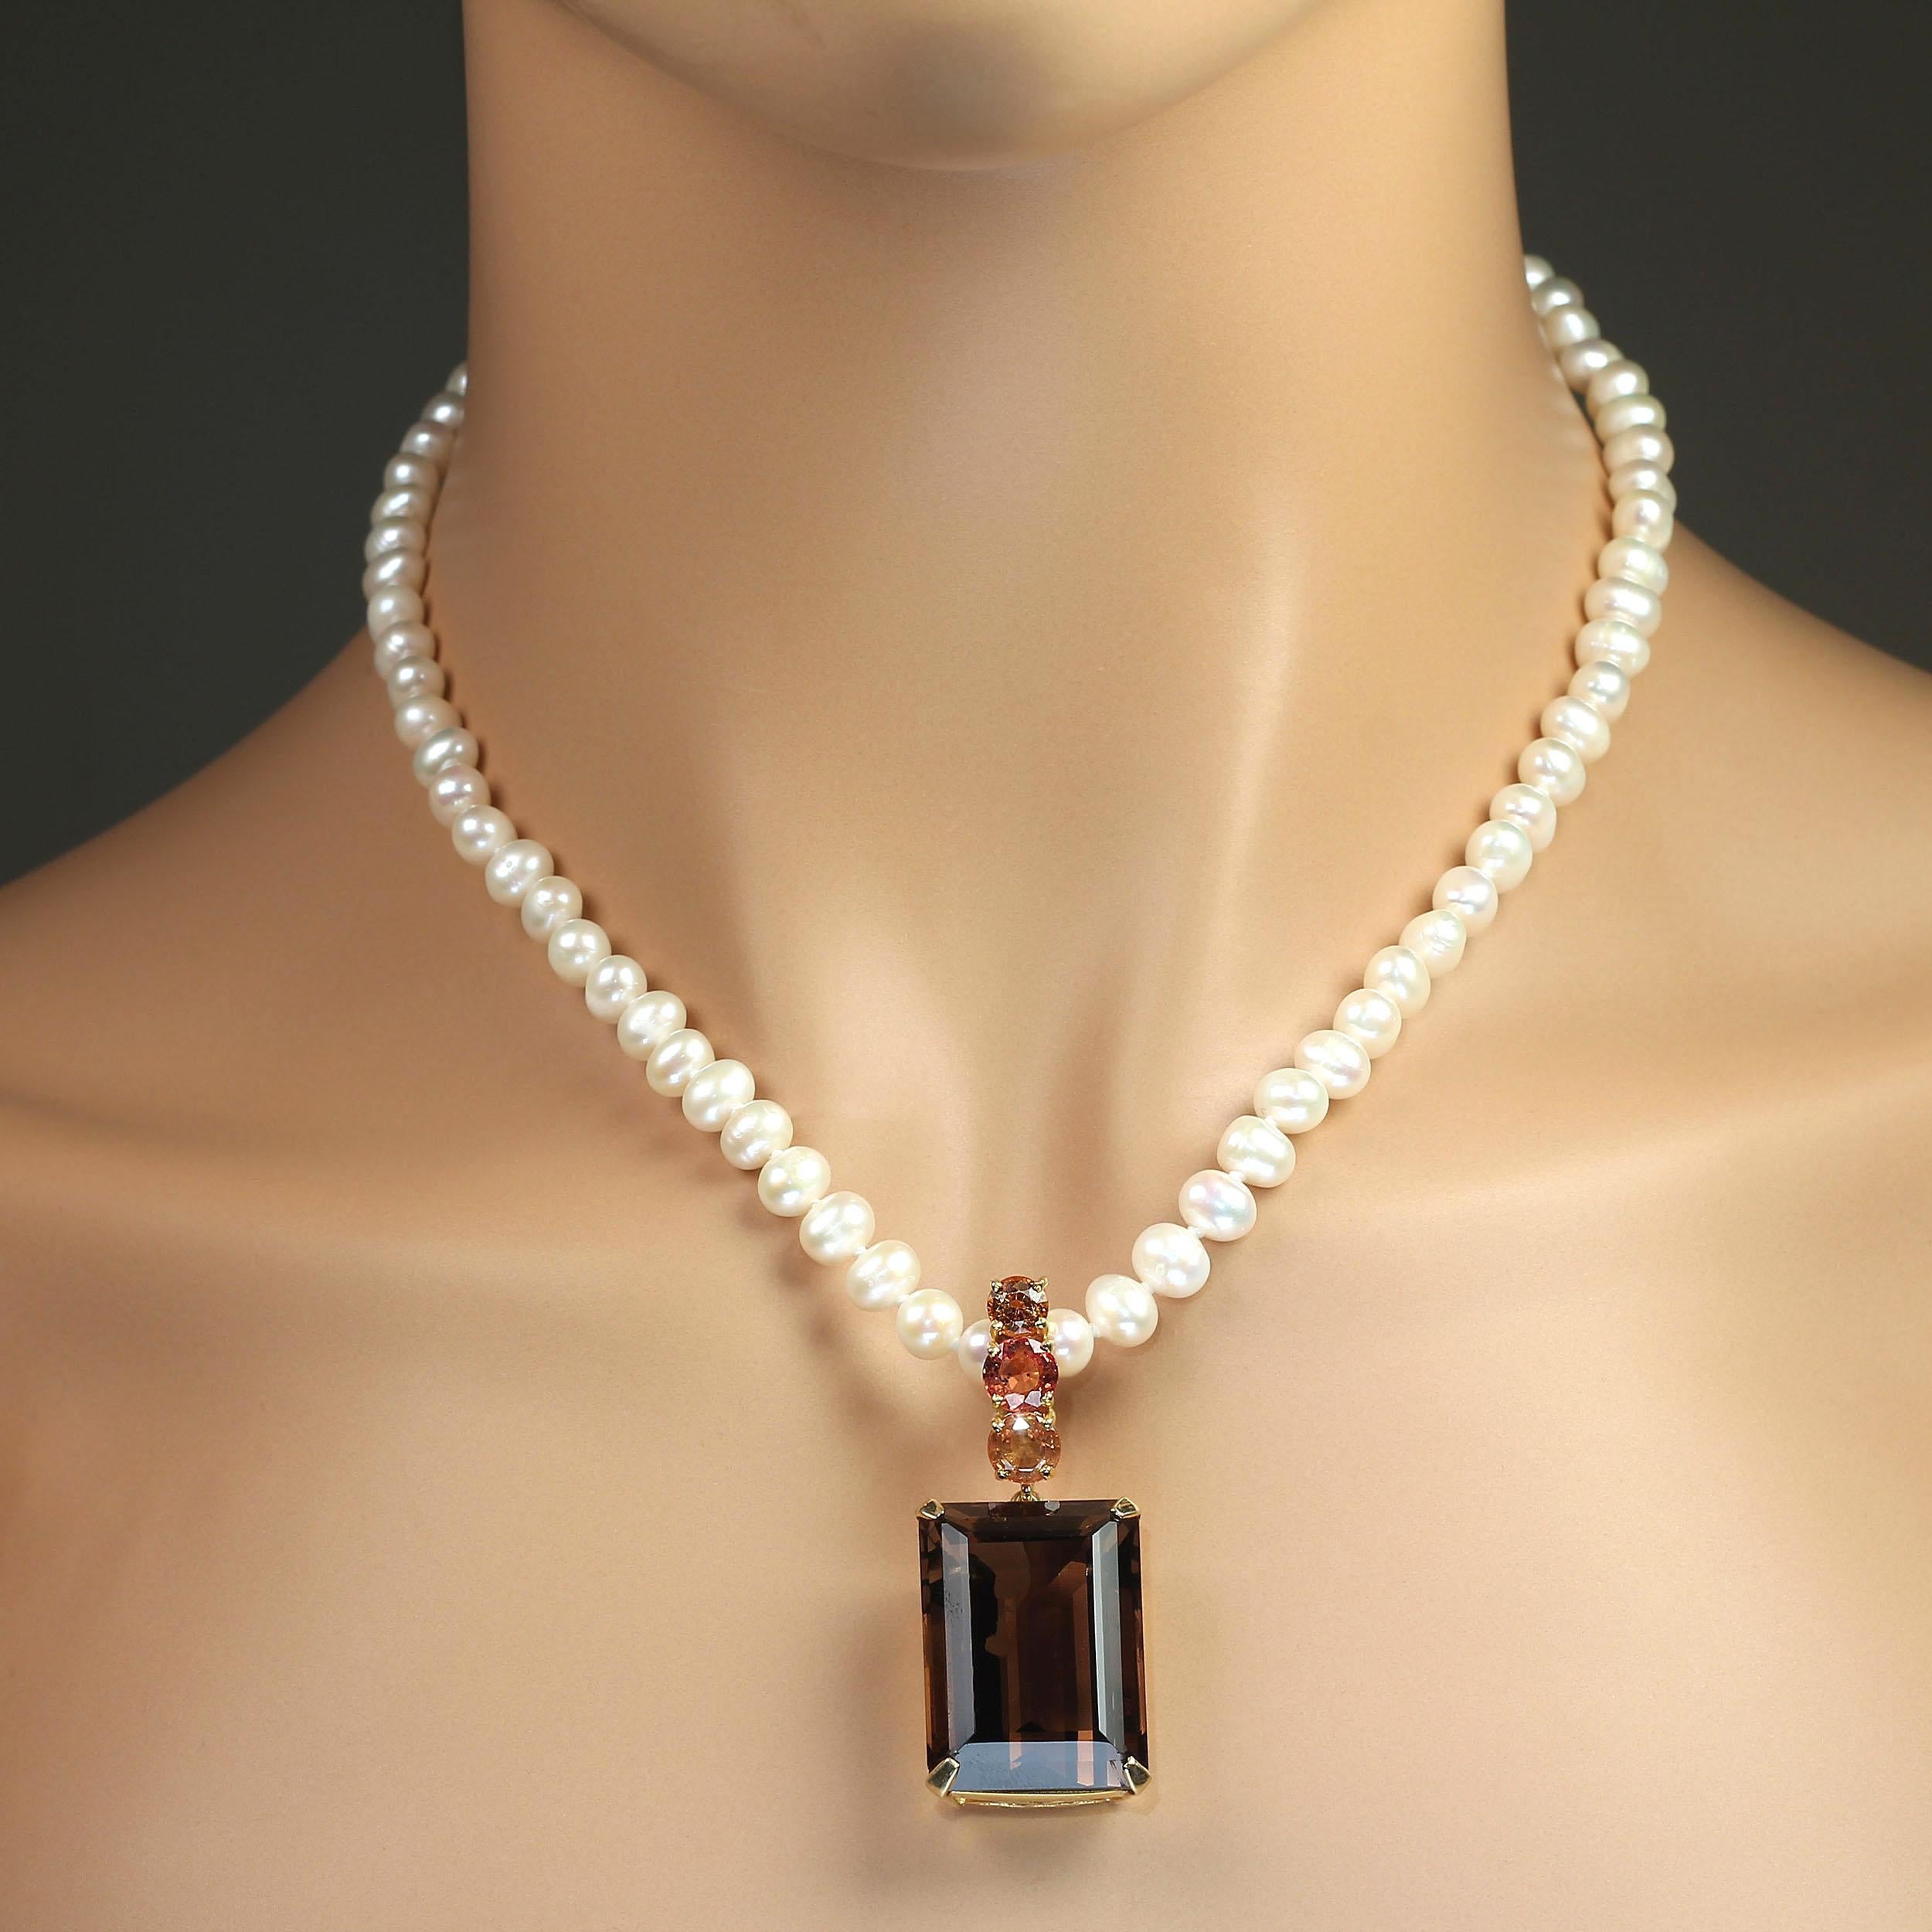 Elegantly large evening pendant of Smoky Quartz topped with peachy/orange Sapphire on a hinged bail. This pendant will easily work with your pearls, scarves, and chains because of the hinged bail. The gold rhodium over Sterling Silver setting is